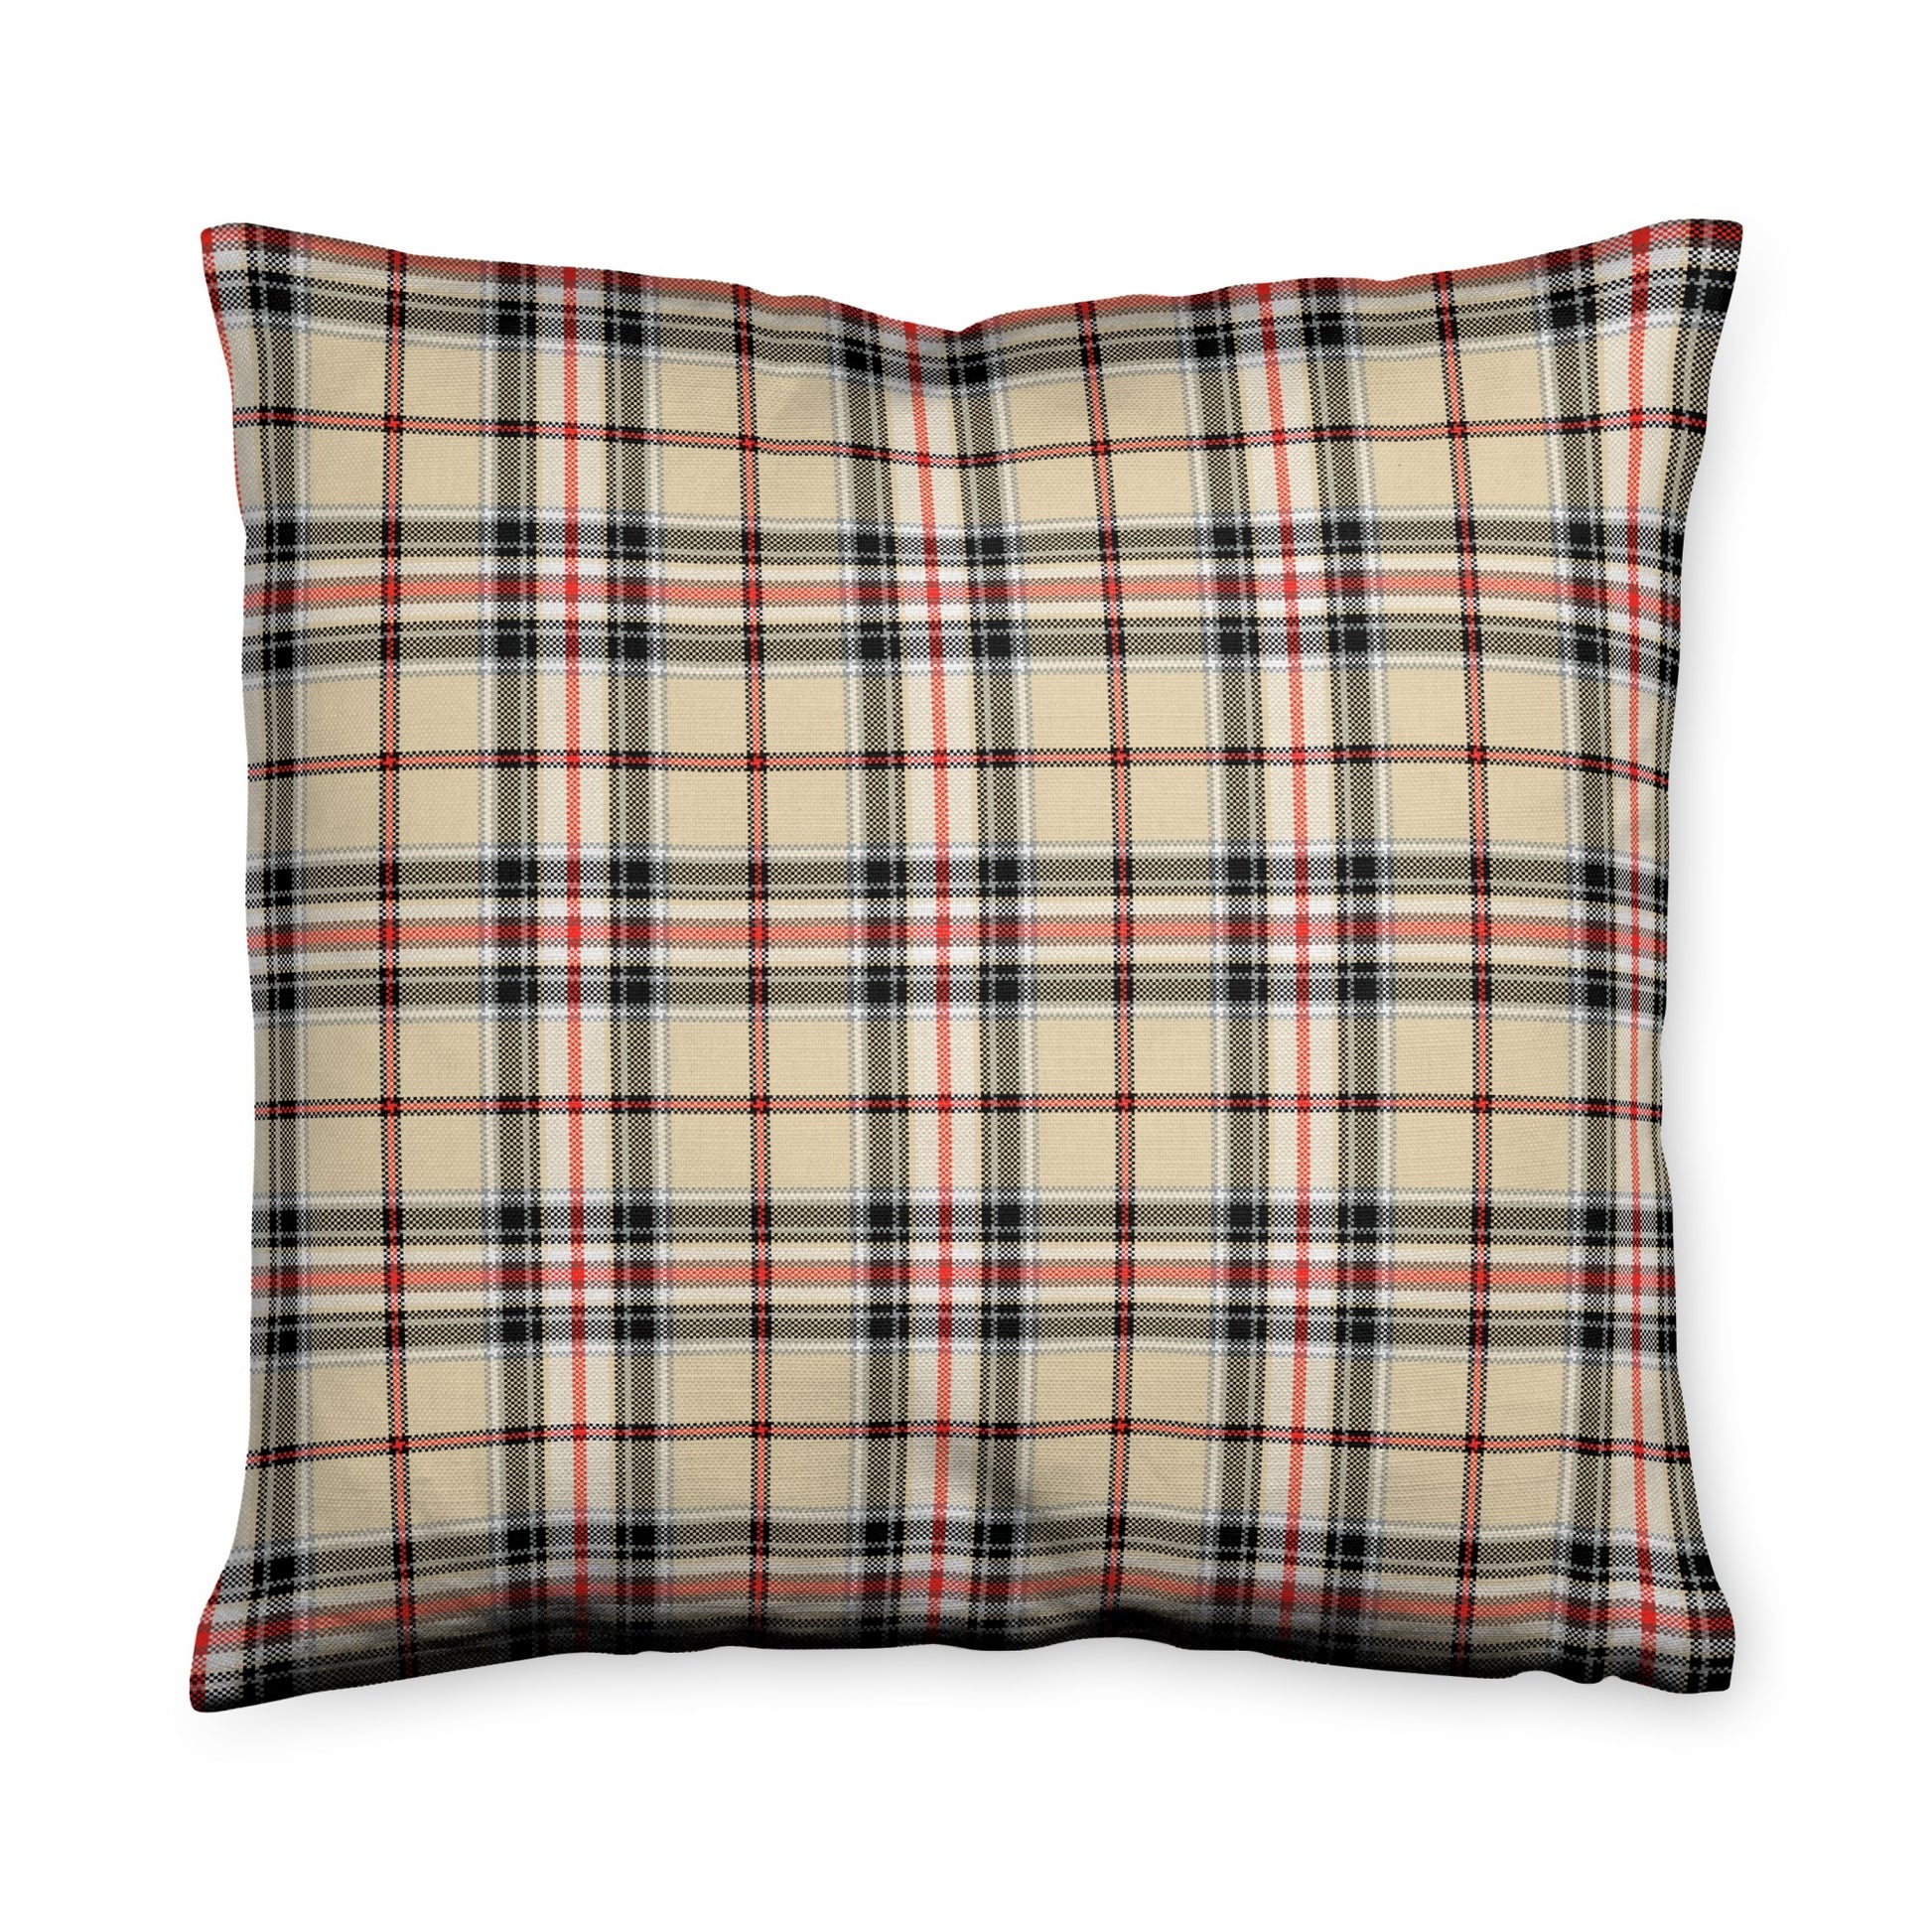 Chic Plaid Throw Pillow - shades and stripes of gold, yellow, black, and red. The dominant color in this design is yellow or gold.